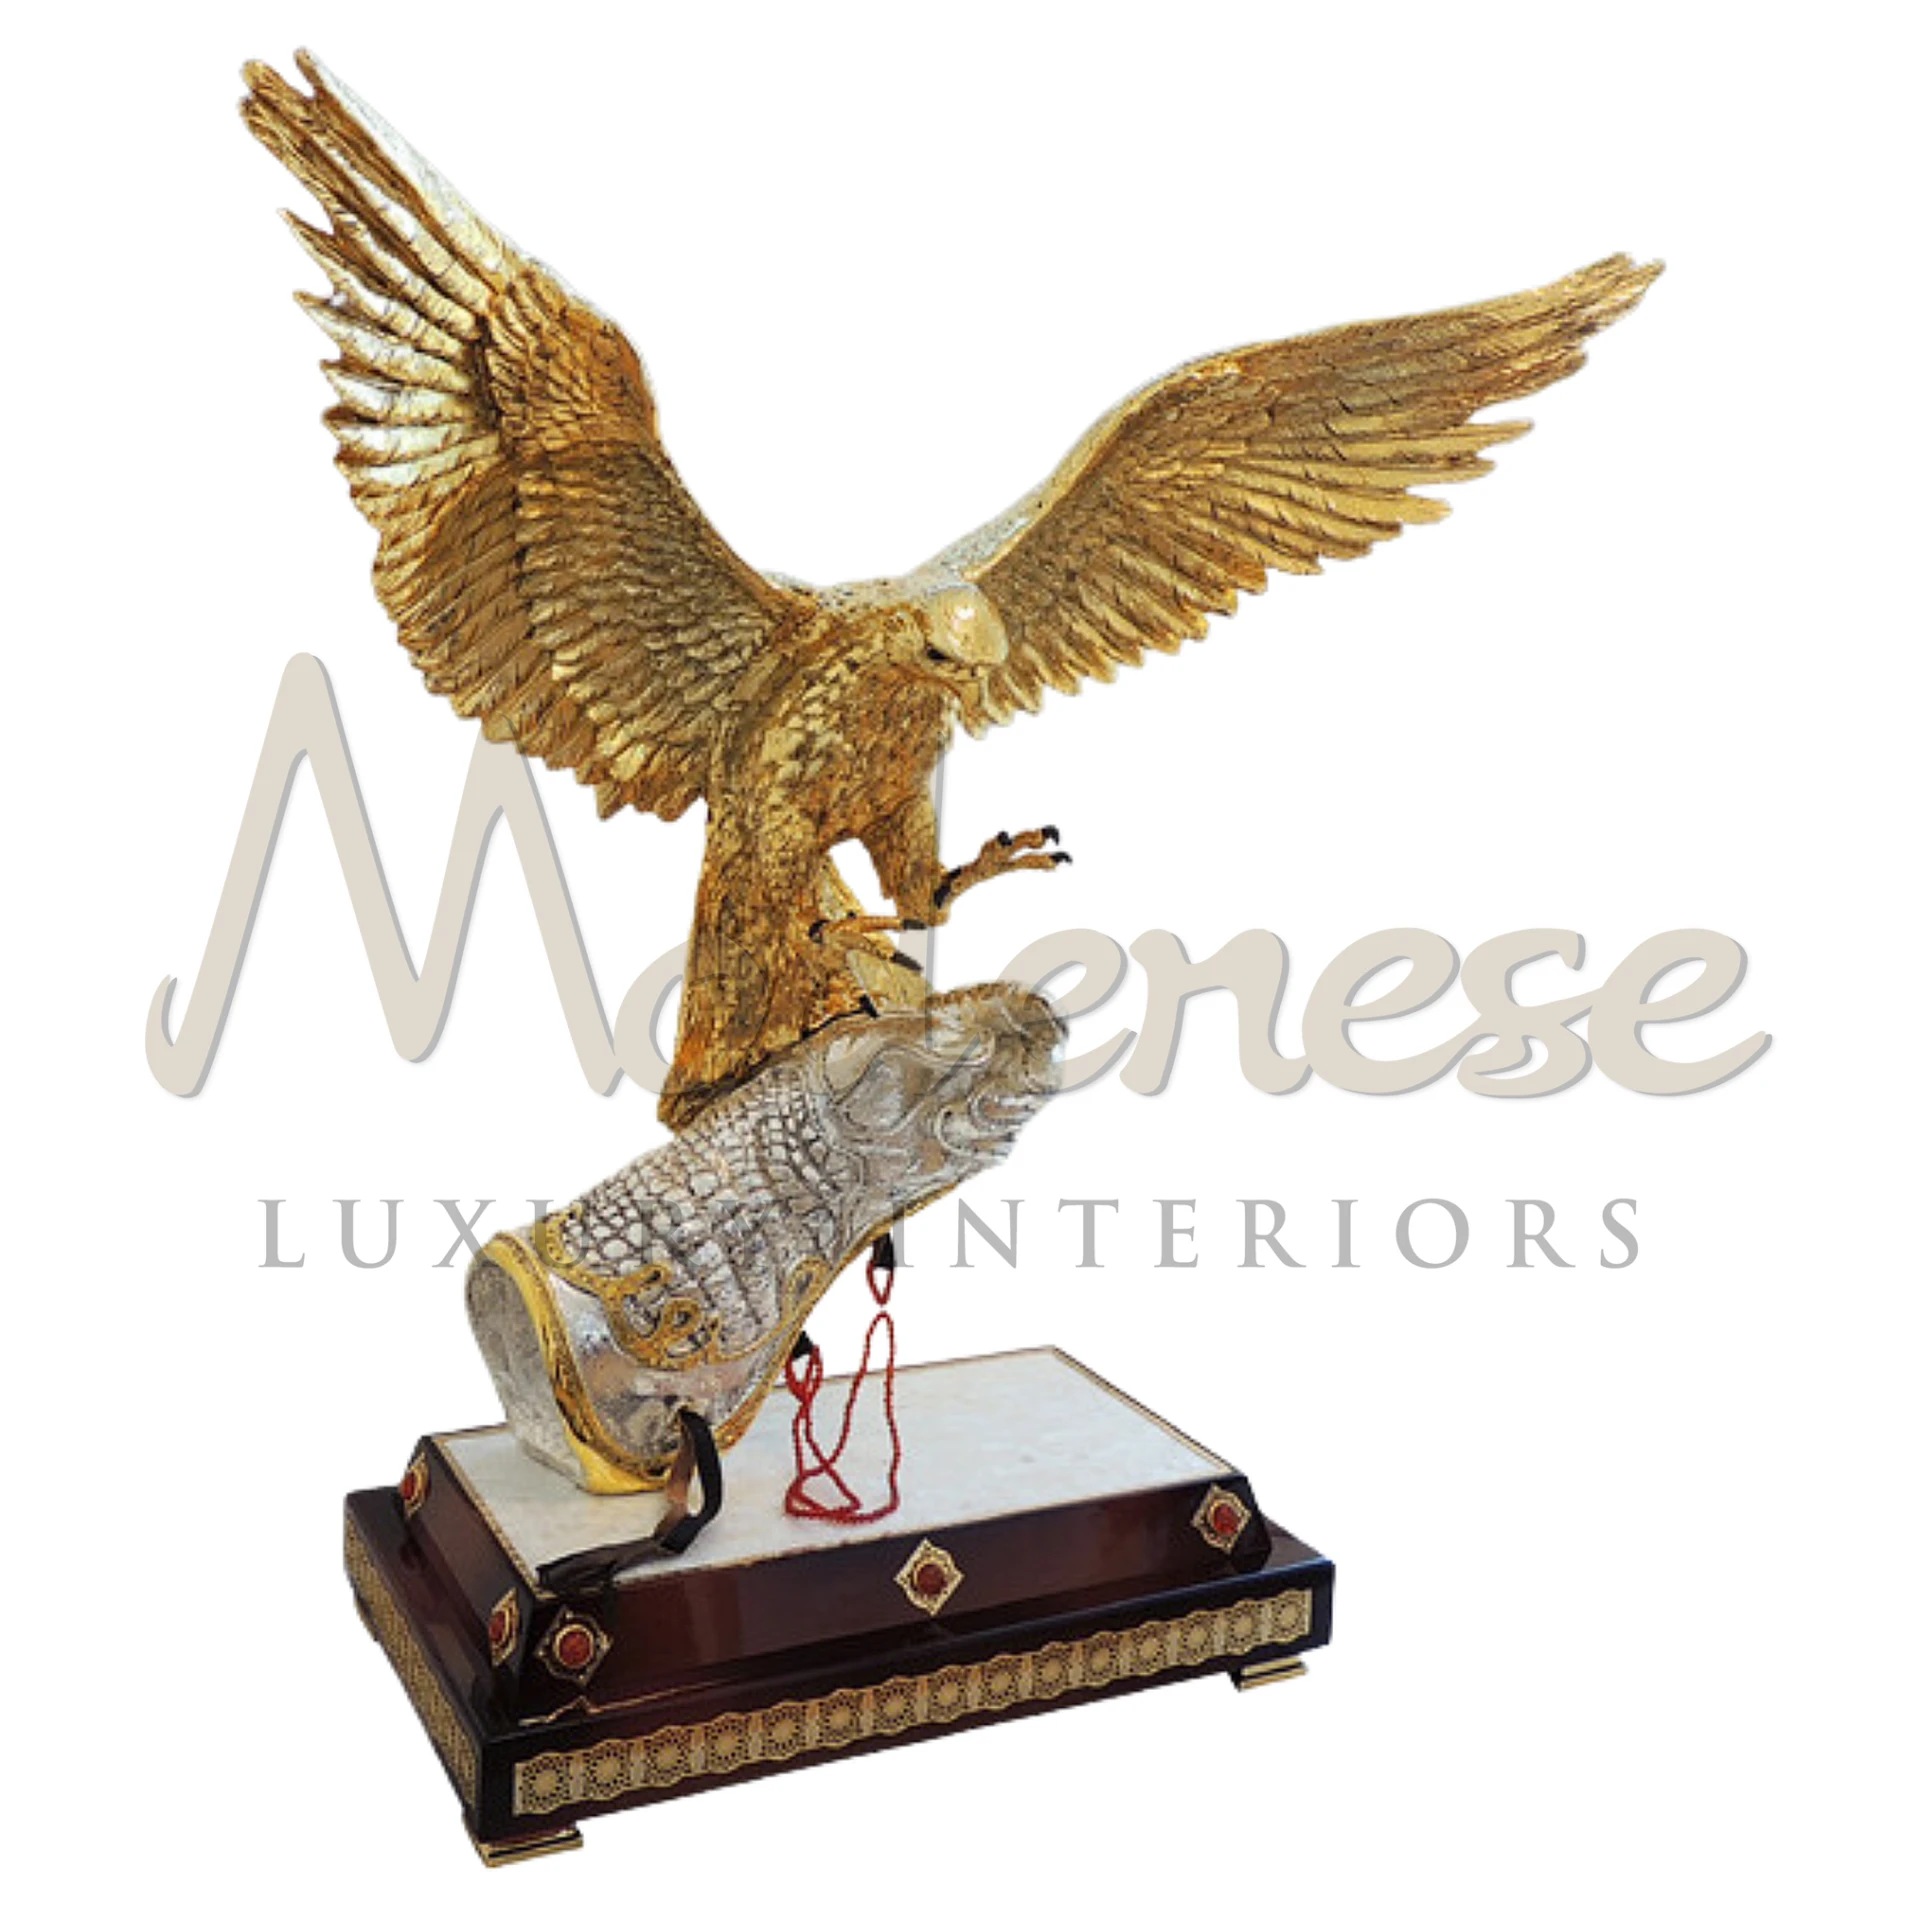 Imperial Gold Falcon statuette, a symbol of freedom and power, enhancing luxury interiors with its classic and baroque style craftsmanship.